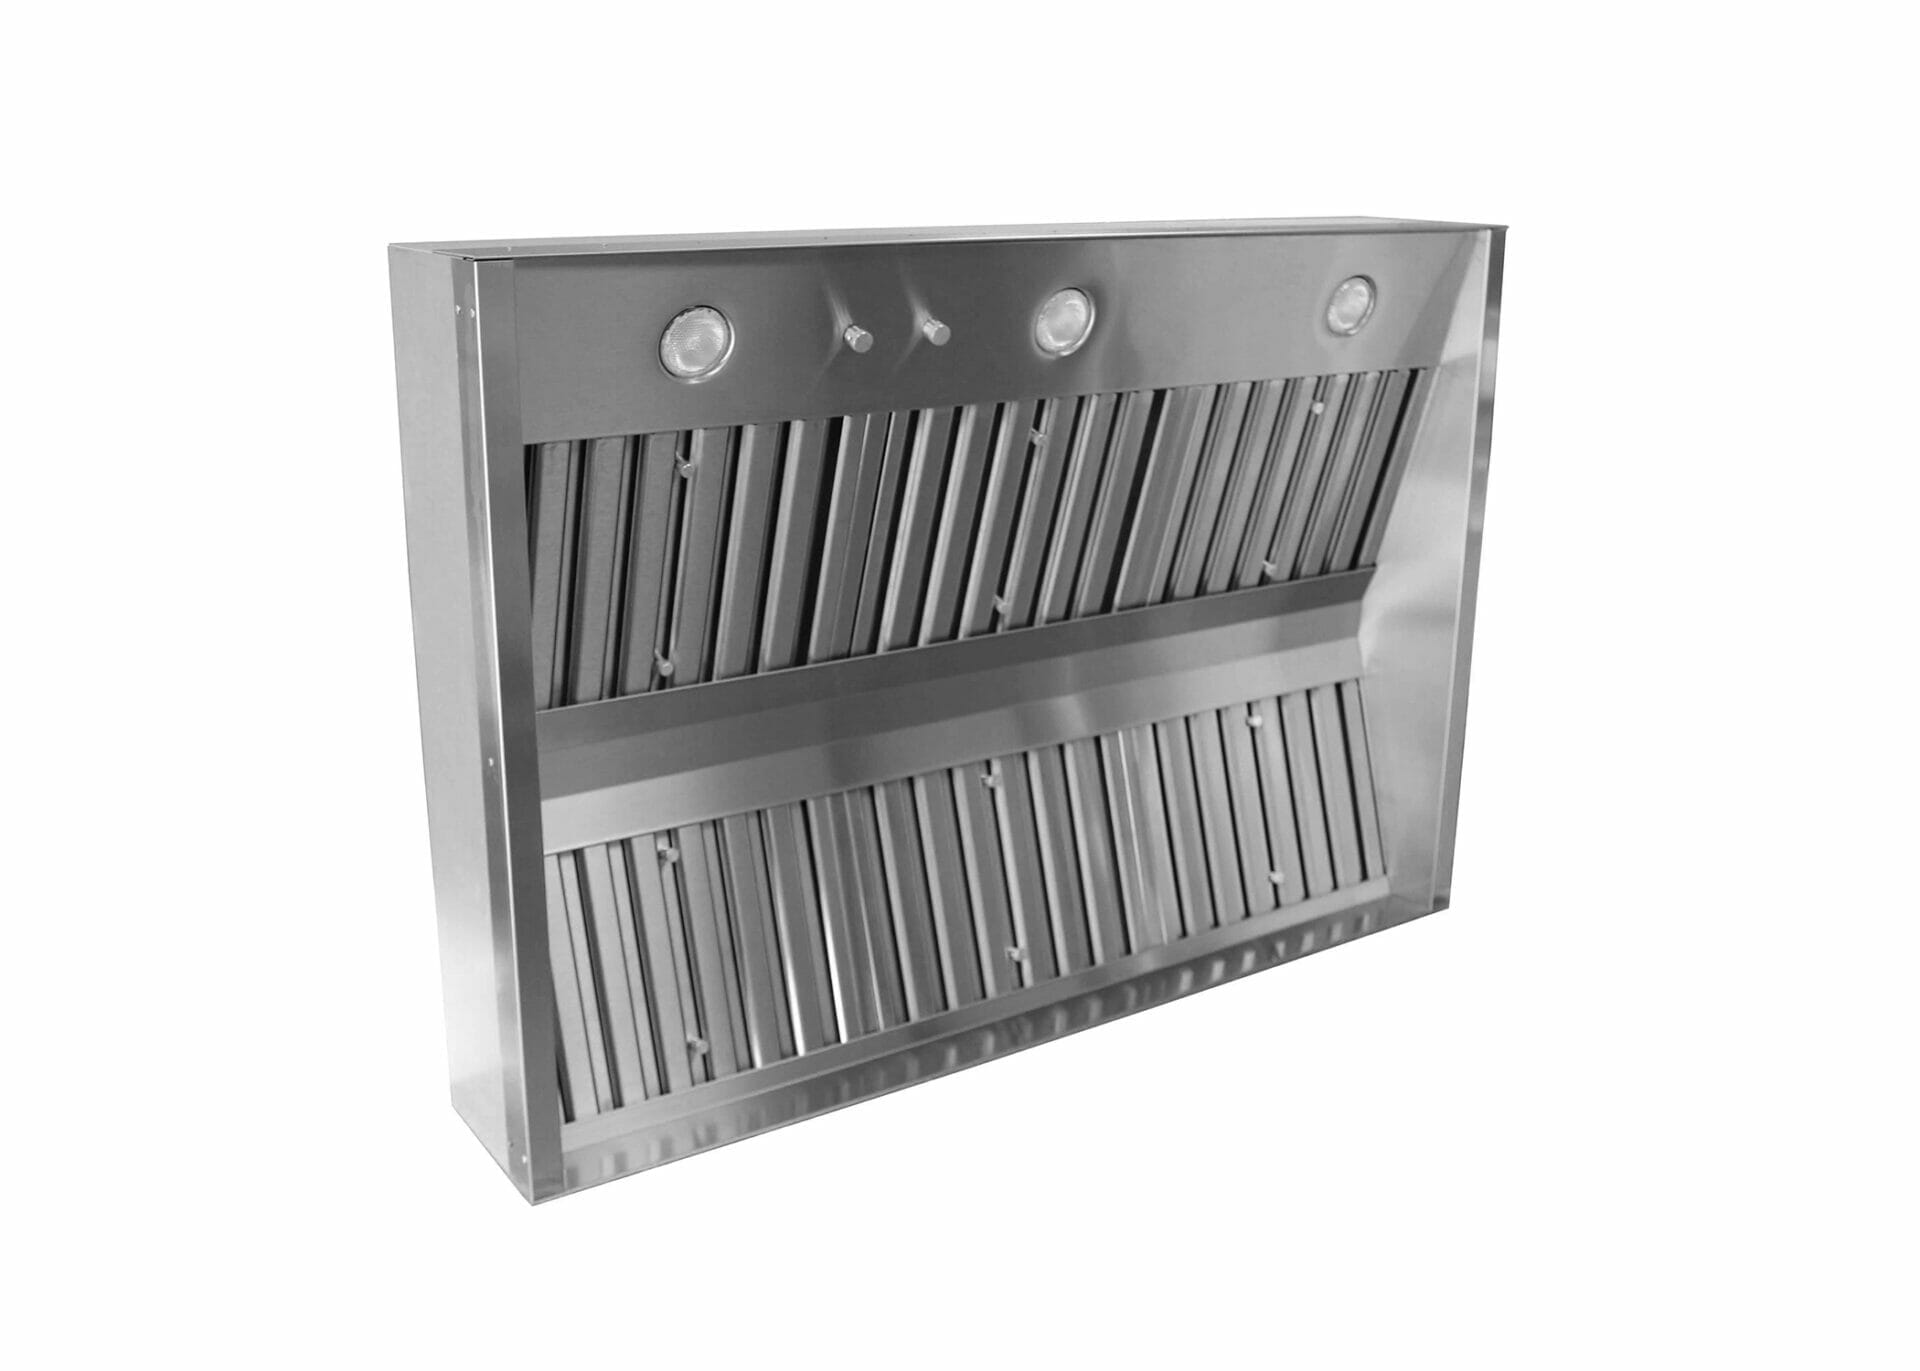 L7200 Series Style Outdoor Barbecue Liners - Trade-Wind®